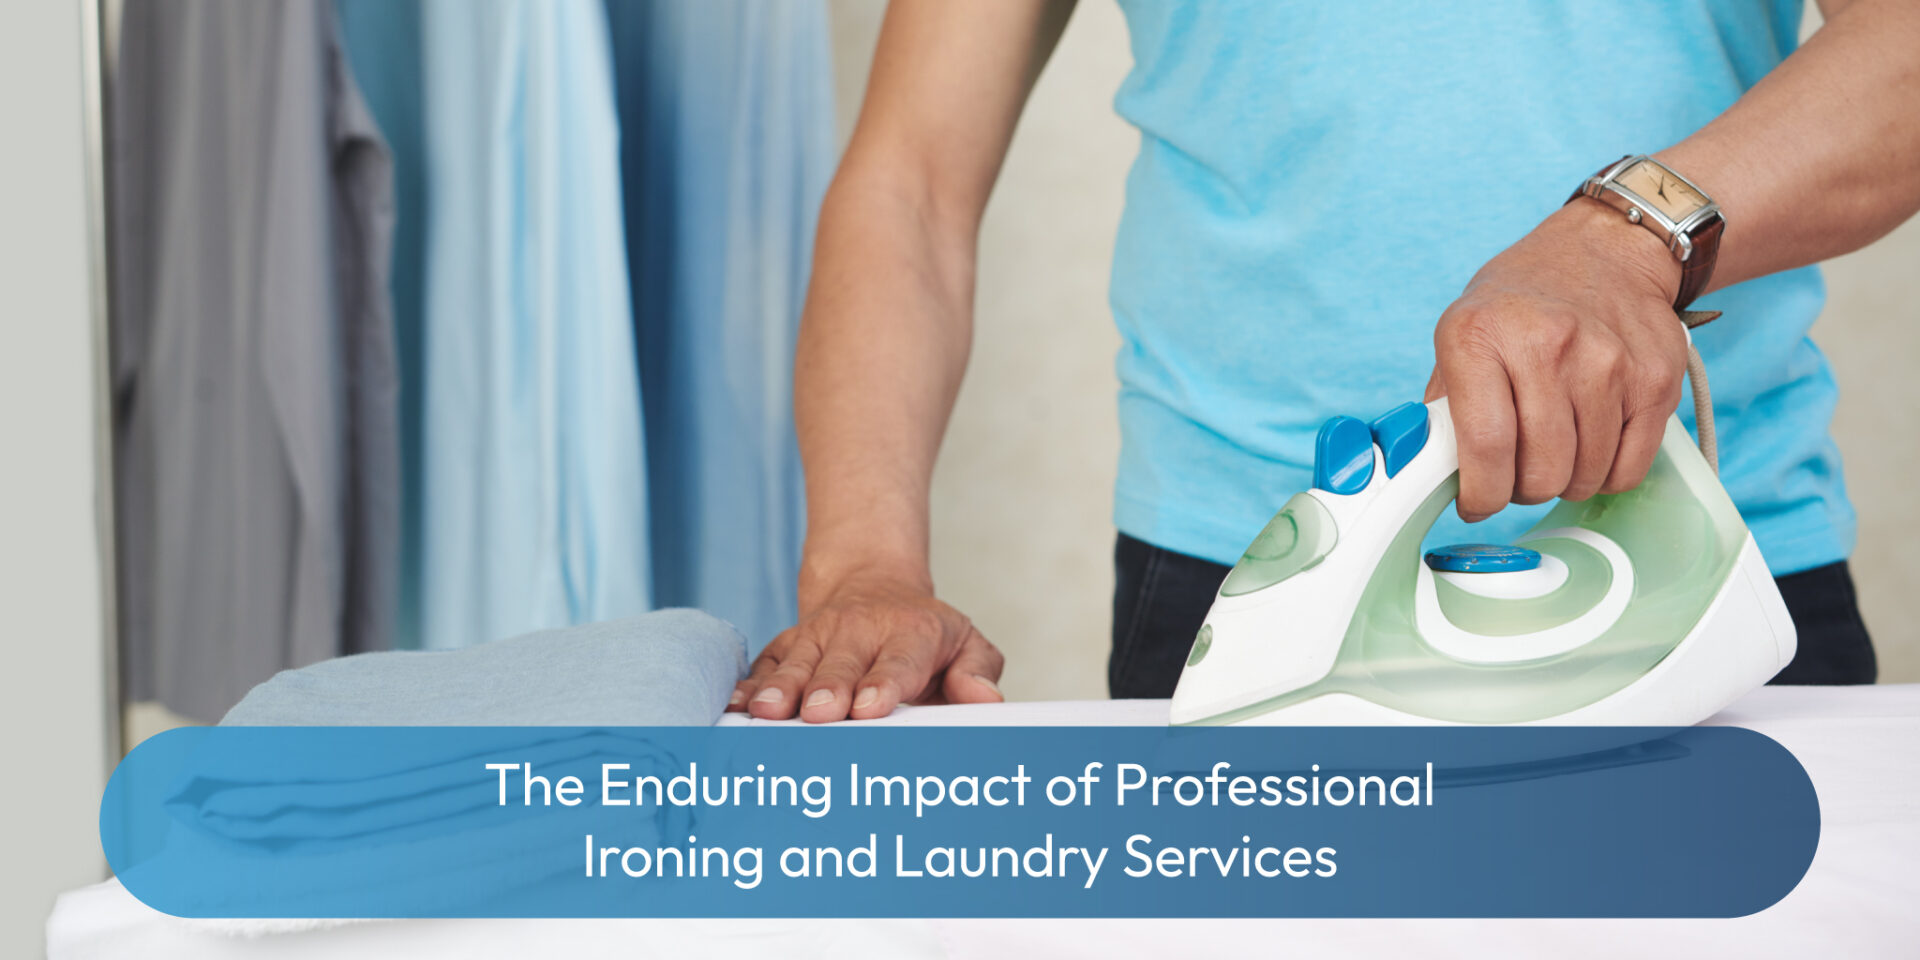 The Enduring Impact of Professional Ironing and Laundry Services